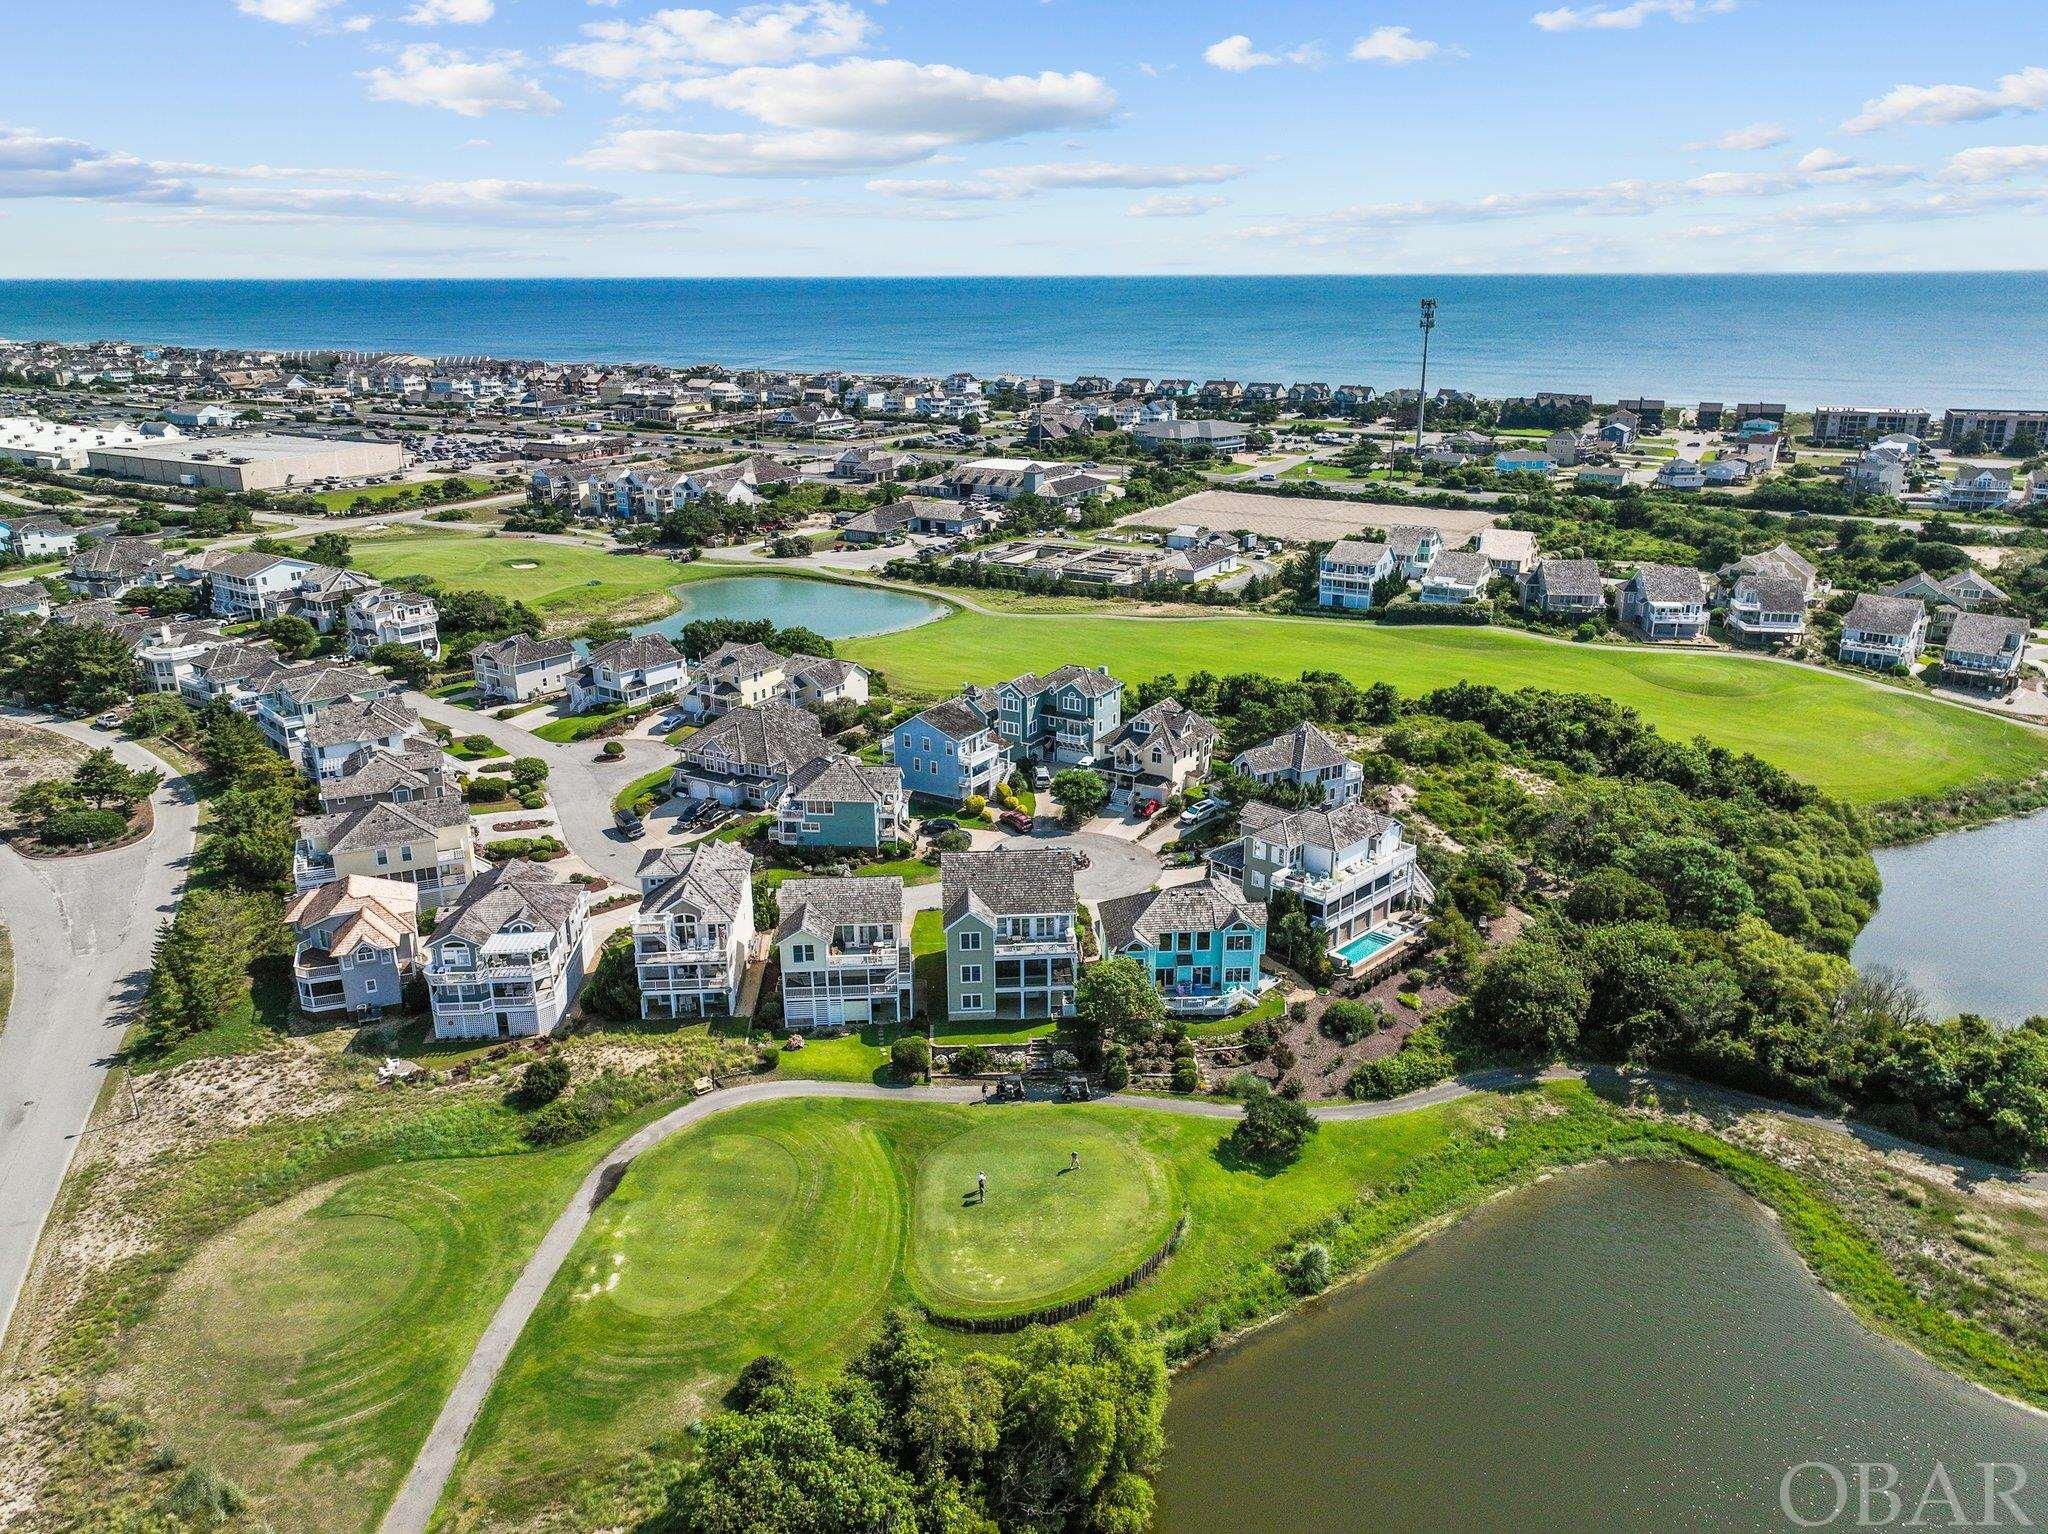 5332 Captains Way, Nags Head, NC 27959, 5 Bedrooms Bedrooms, ,5 BathroomsBathrooms,Residential,For sale,Captains Way,124544